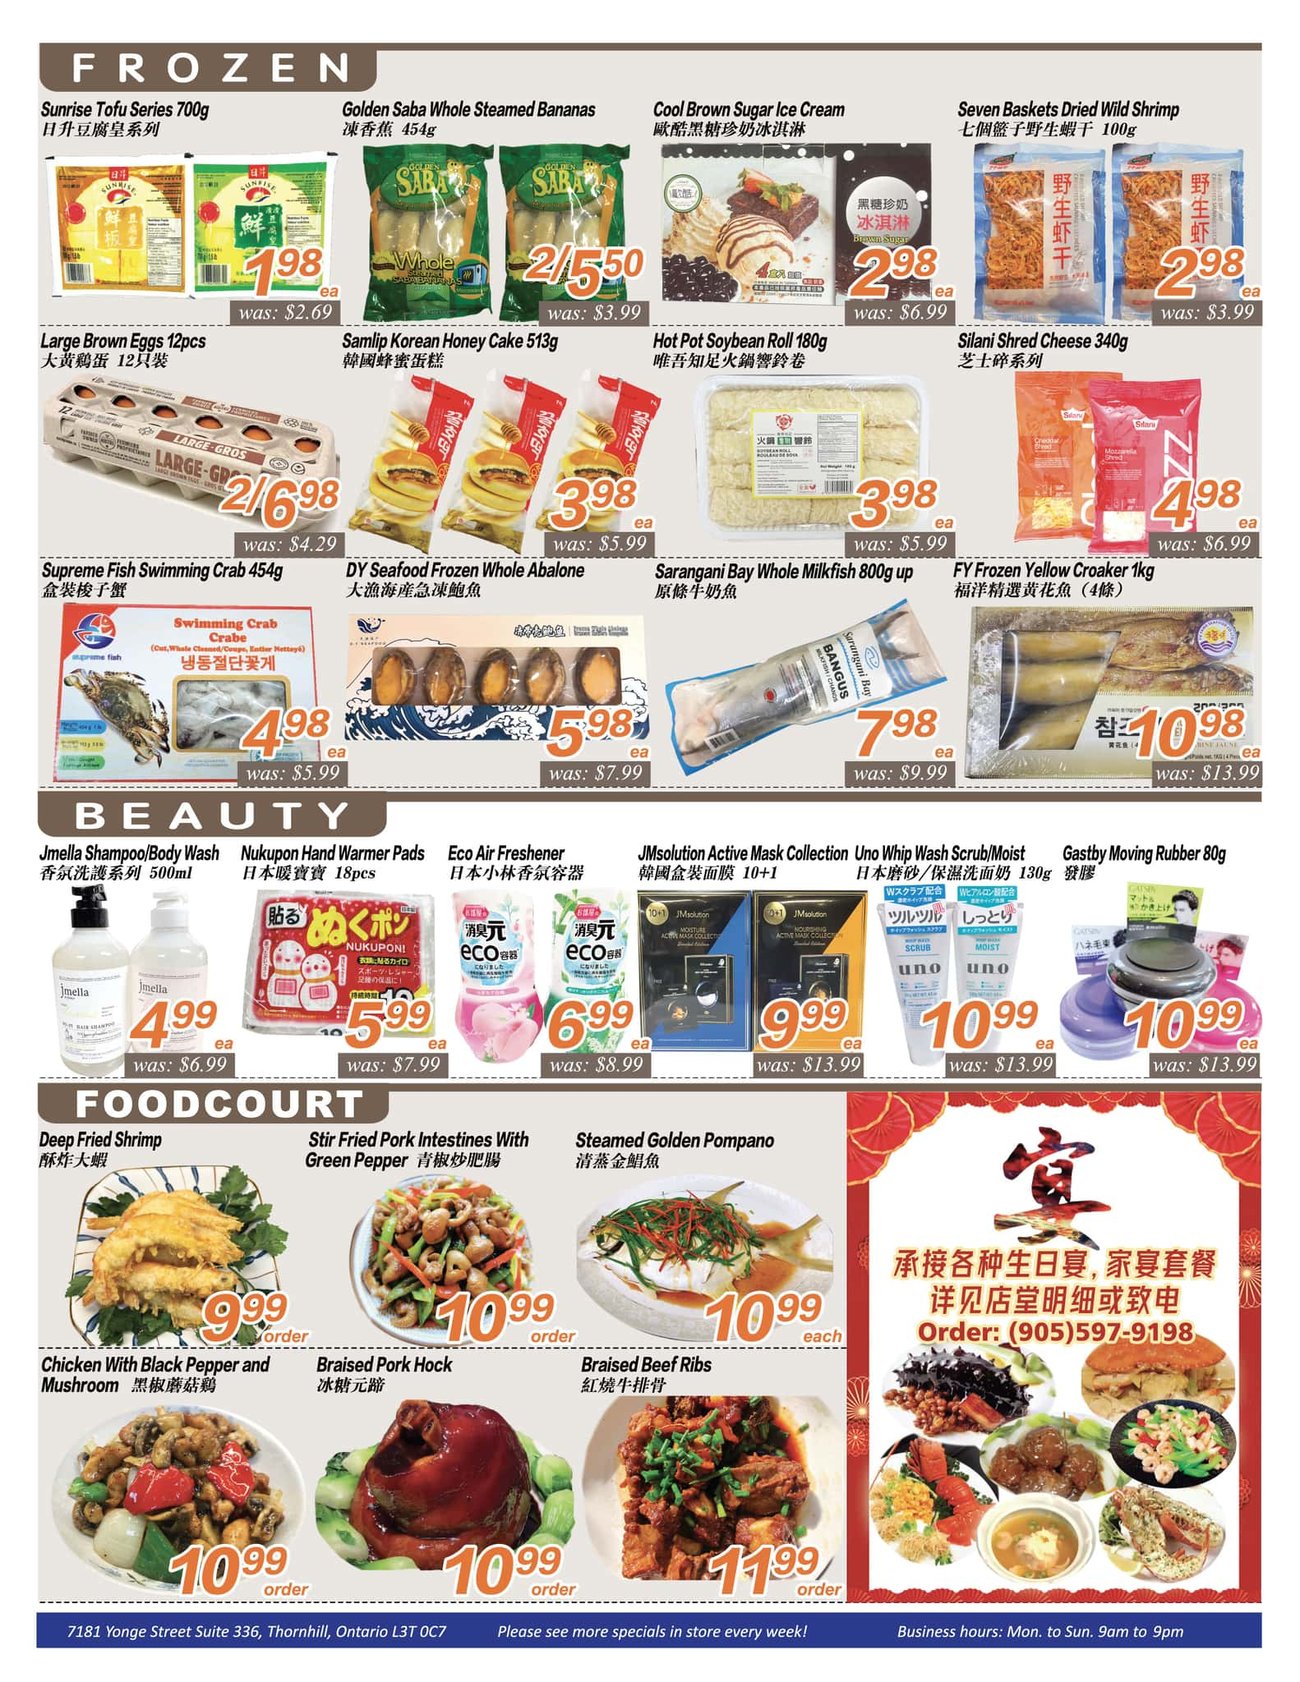 Seasons Foodmart - Thornhill - Weekly Flyer Specials - Page 2